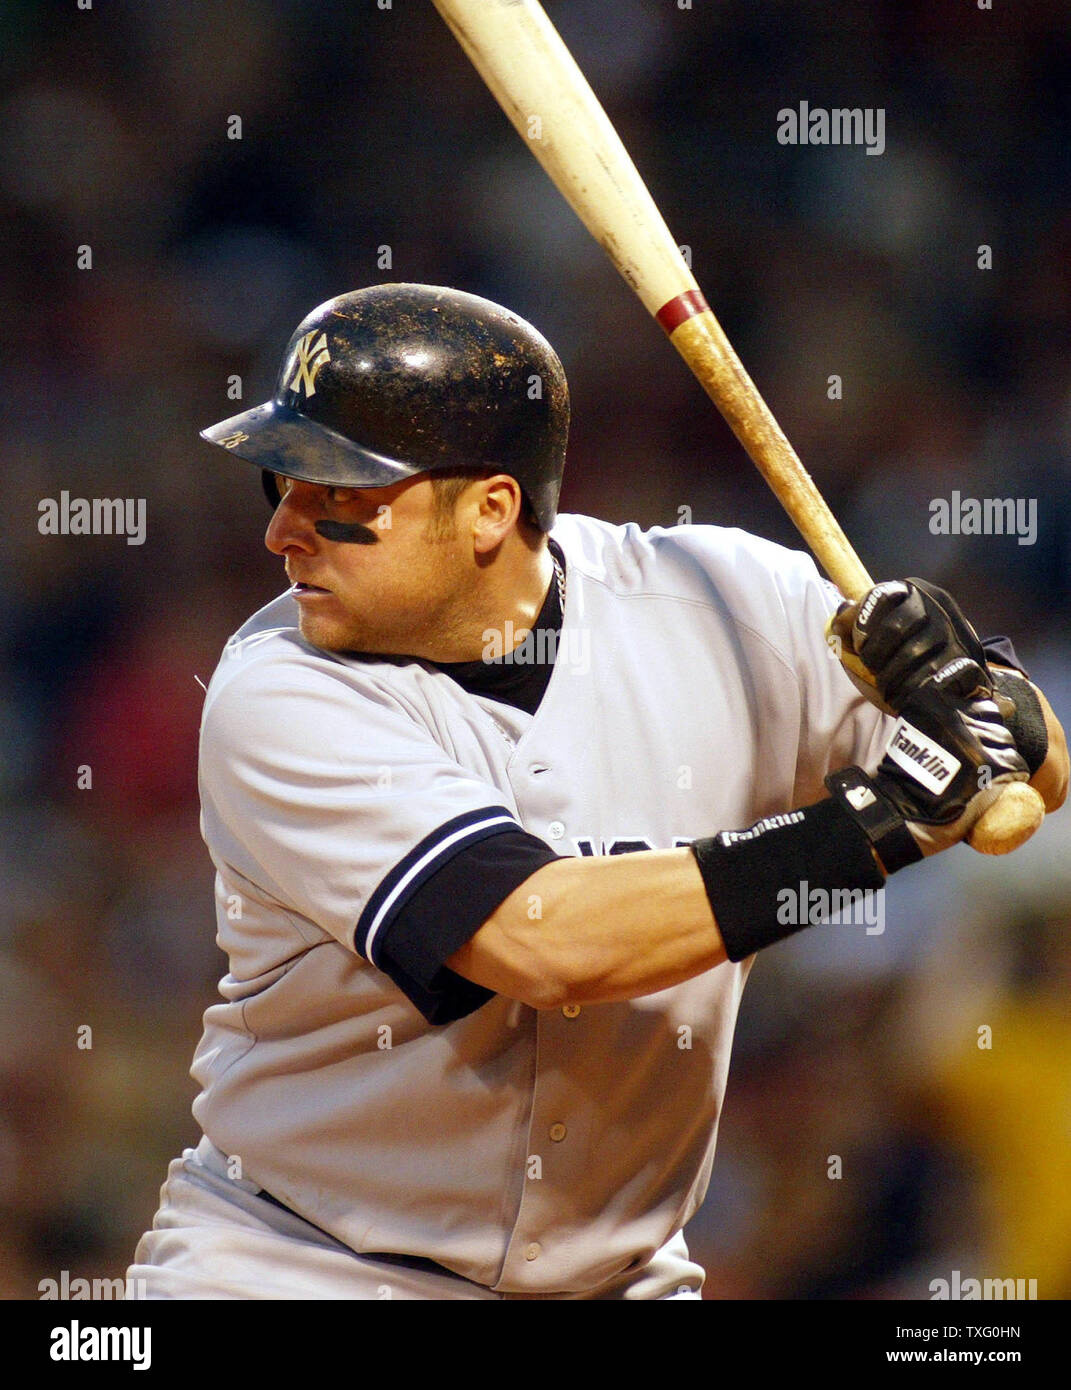 Karim Garcia, of the New York Yankees, awaits a pitch, in the sixth inning, as the New York Yankees face the  Red Sox face, in Game 5, of the American League Championship Series, at Fenway Park, Tuesday, October 14, 2003, in Boston, Massachusetts. The New York Yankees defeated the Boston Red Sox 4-to-2, giving them a one game lead in the Series.  Garcia, and another member of the New York Yankees organization are facing assault and battery charges from the Boston District Attorneys Offices, when they allegedly attacked a member of the Boston Red Sox grounds crew, during Game 3 of the American Stock Photo